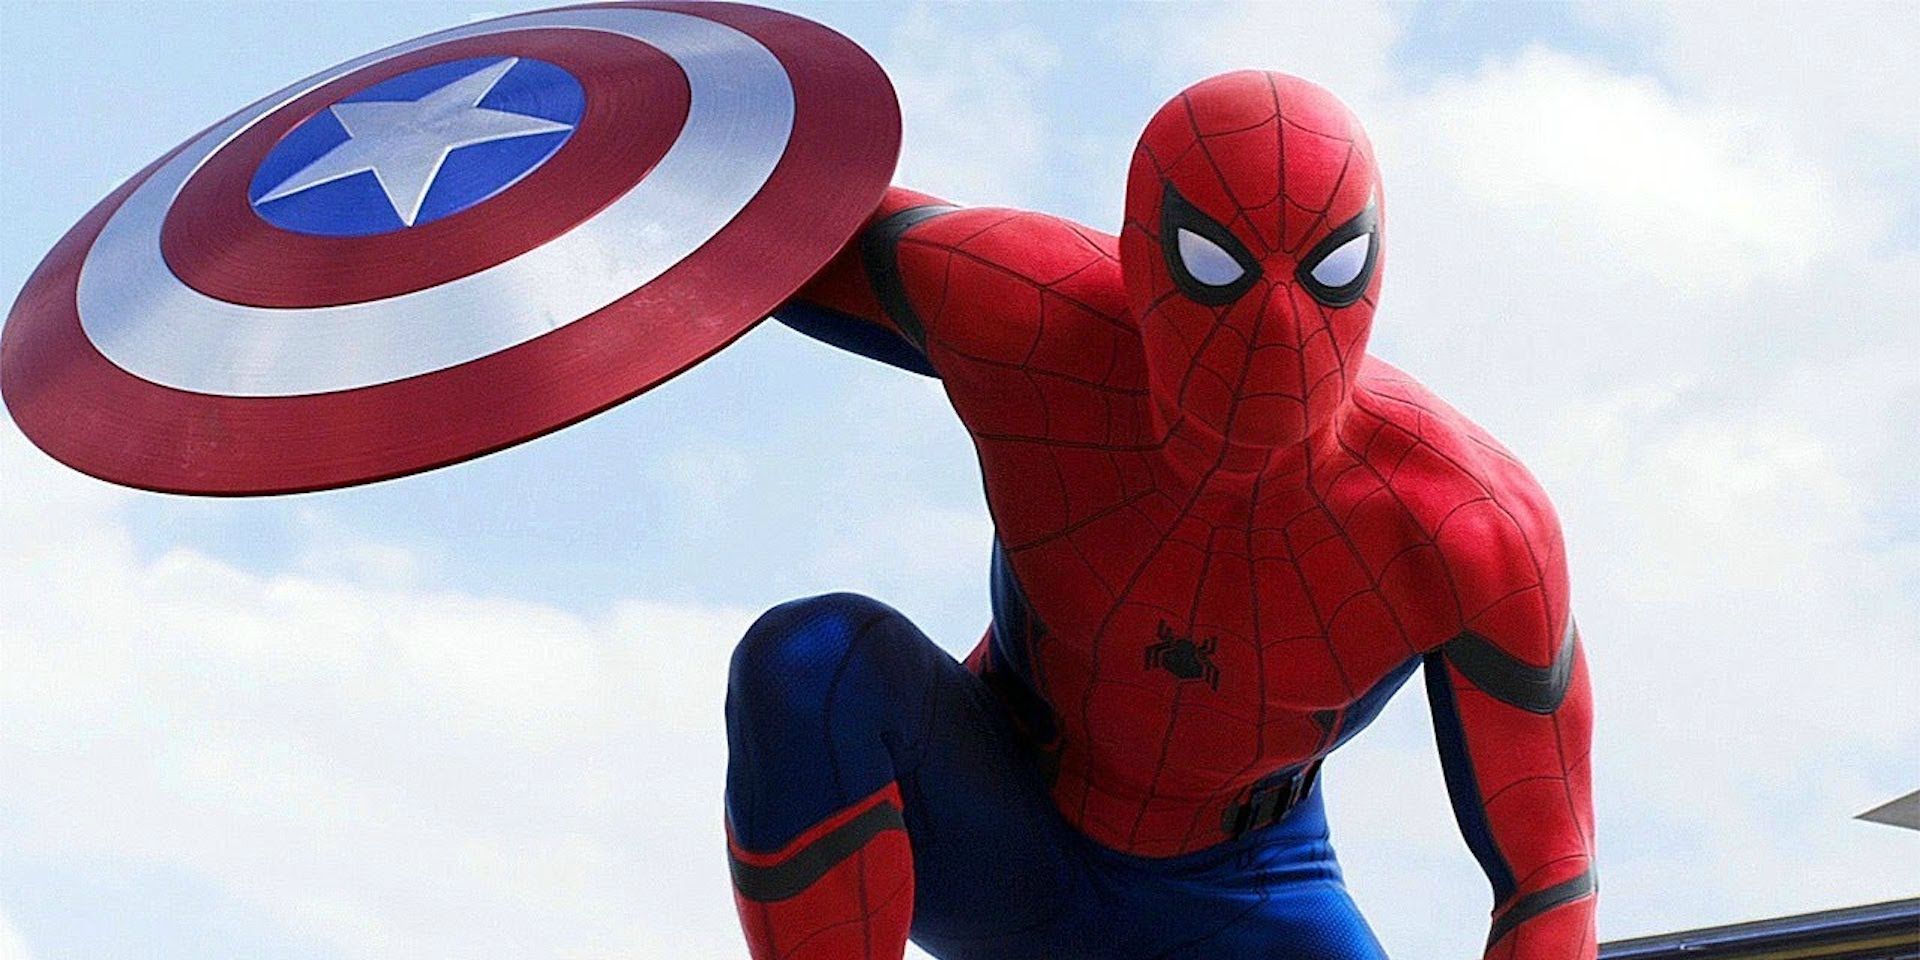 Tom Holland as Spider Man with Shield in Captain America Civil War